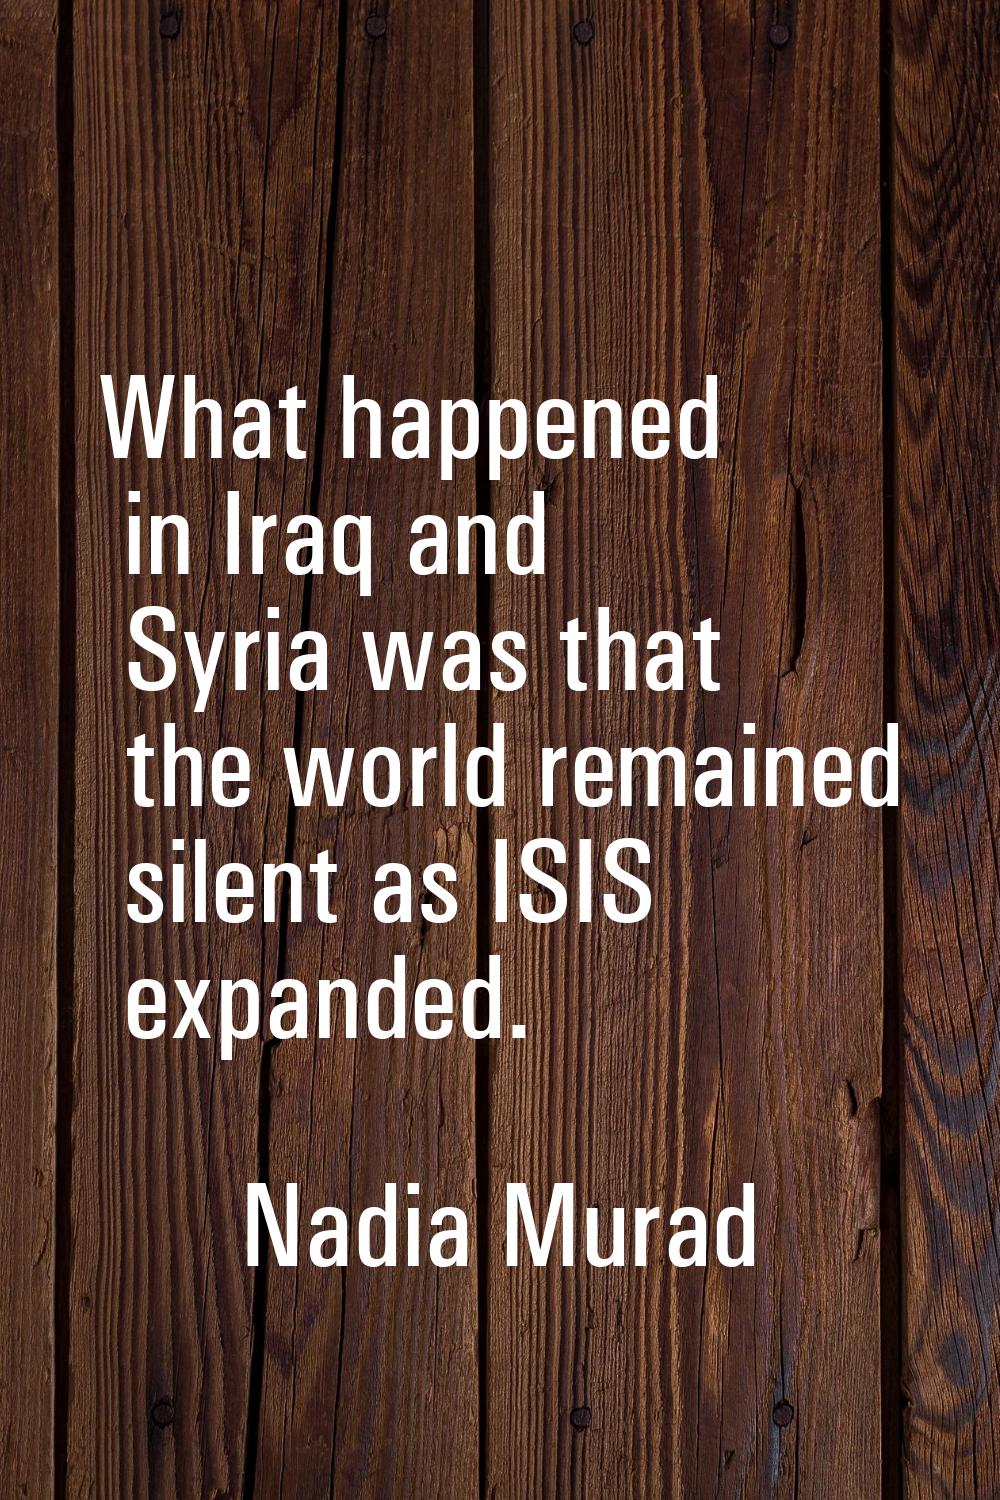 What happened in Iraq and Syria was that the world remained silent as ISIS expanded.